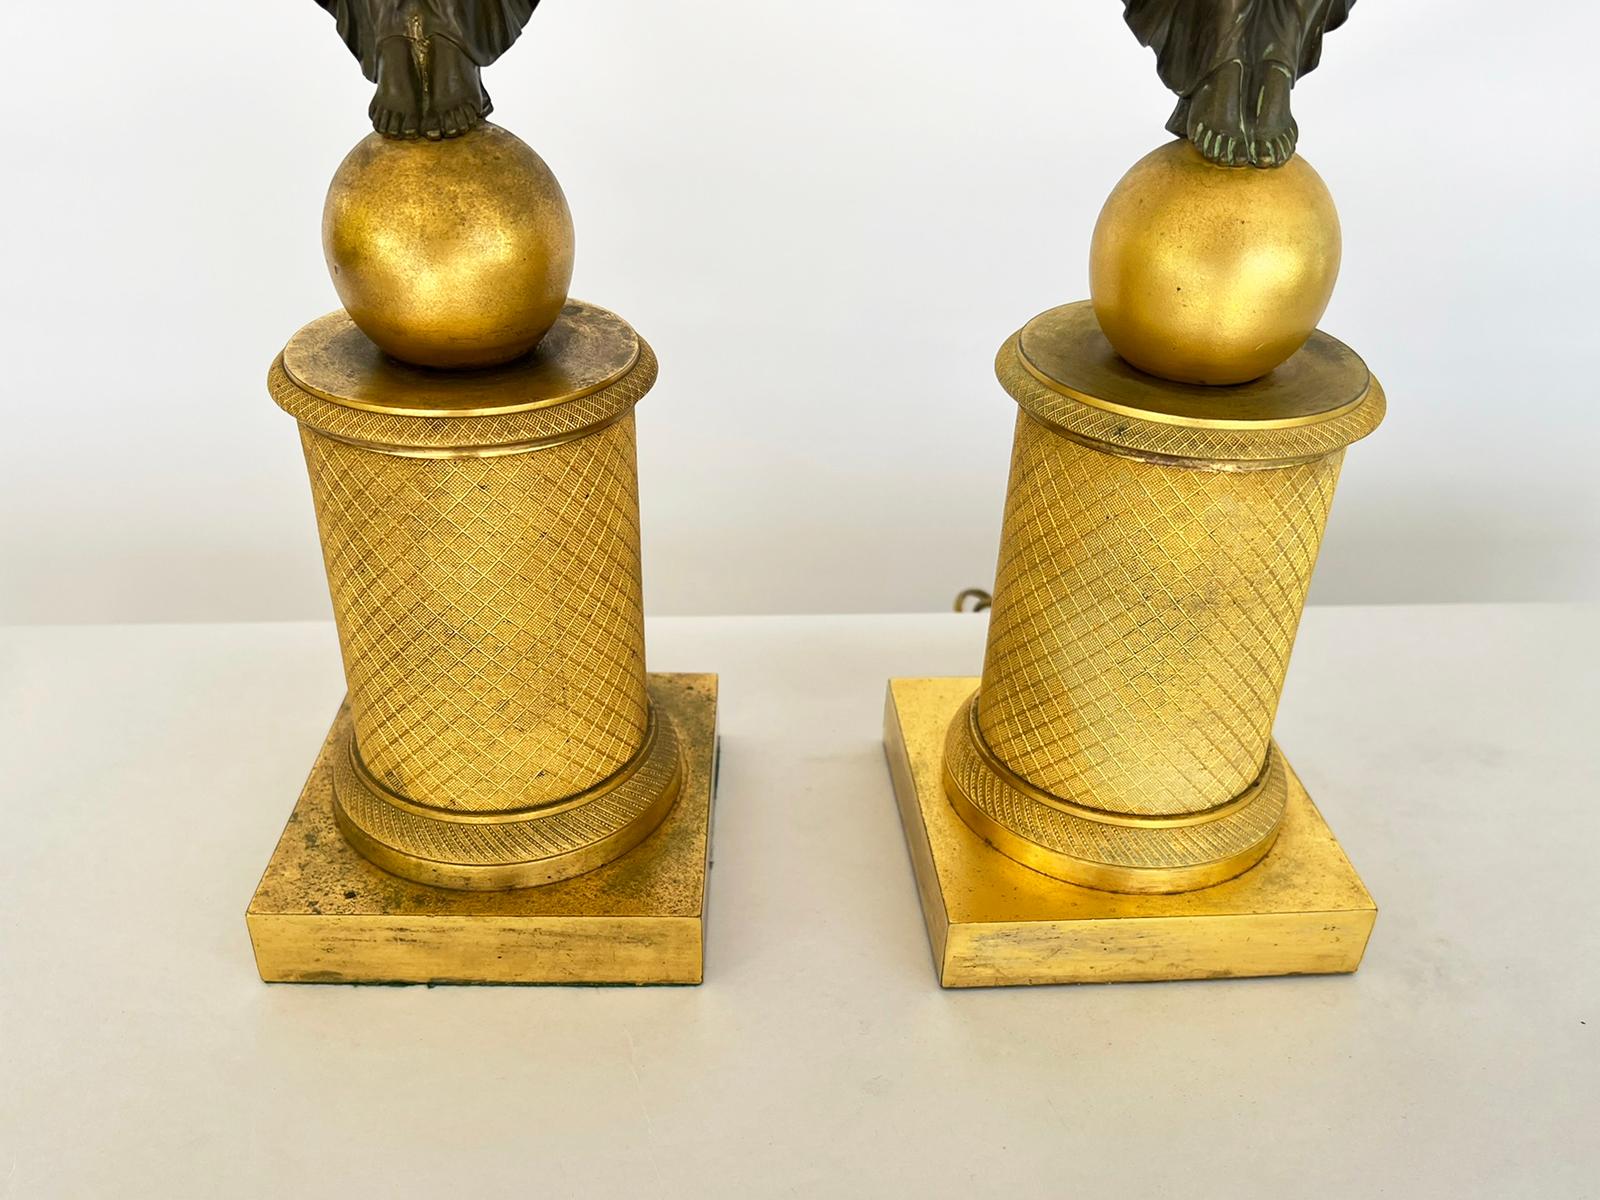 Early 19th Century Pair of Late Empire Ormolu and Patented Bronze Figural Candelabra Lamps, C. 1815 For Sale